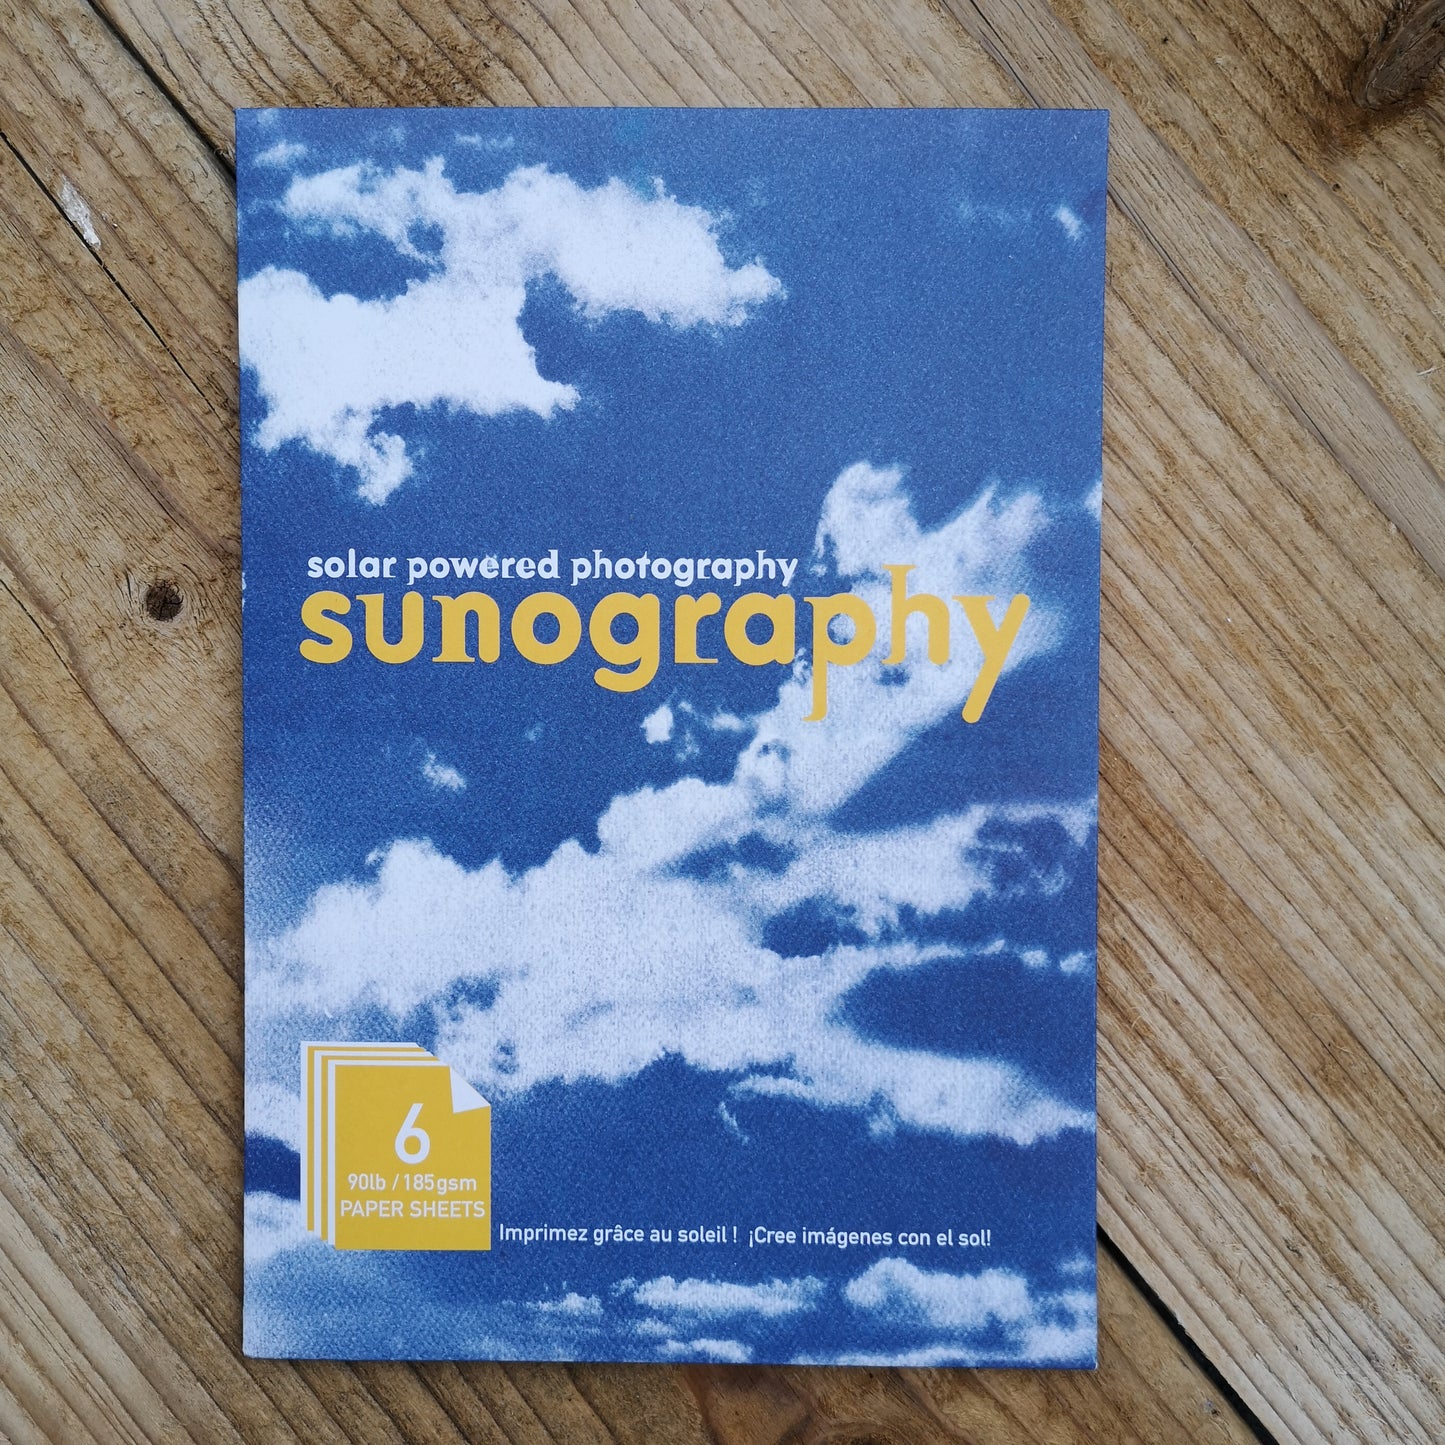 Sunography paper sheets